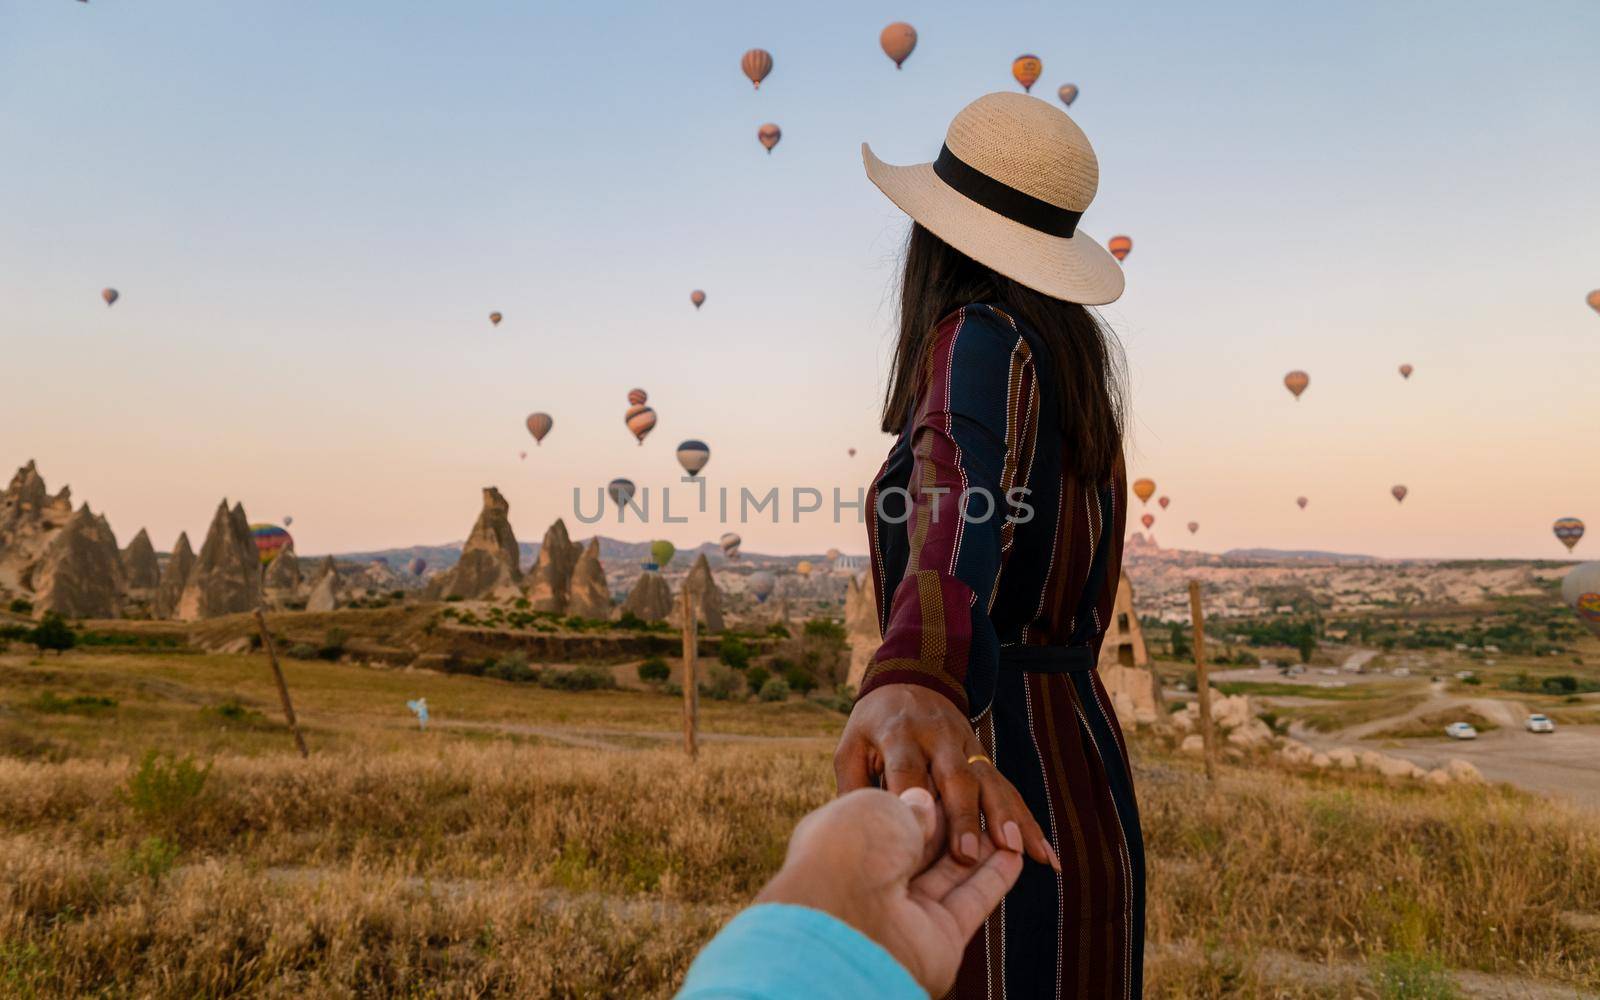 happy young couple during sunrise watching the hot air balloons of Kapadokya Cappadocia Turkey by fokkebok